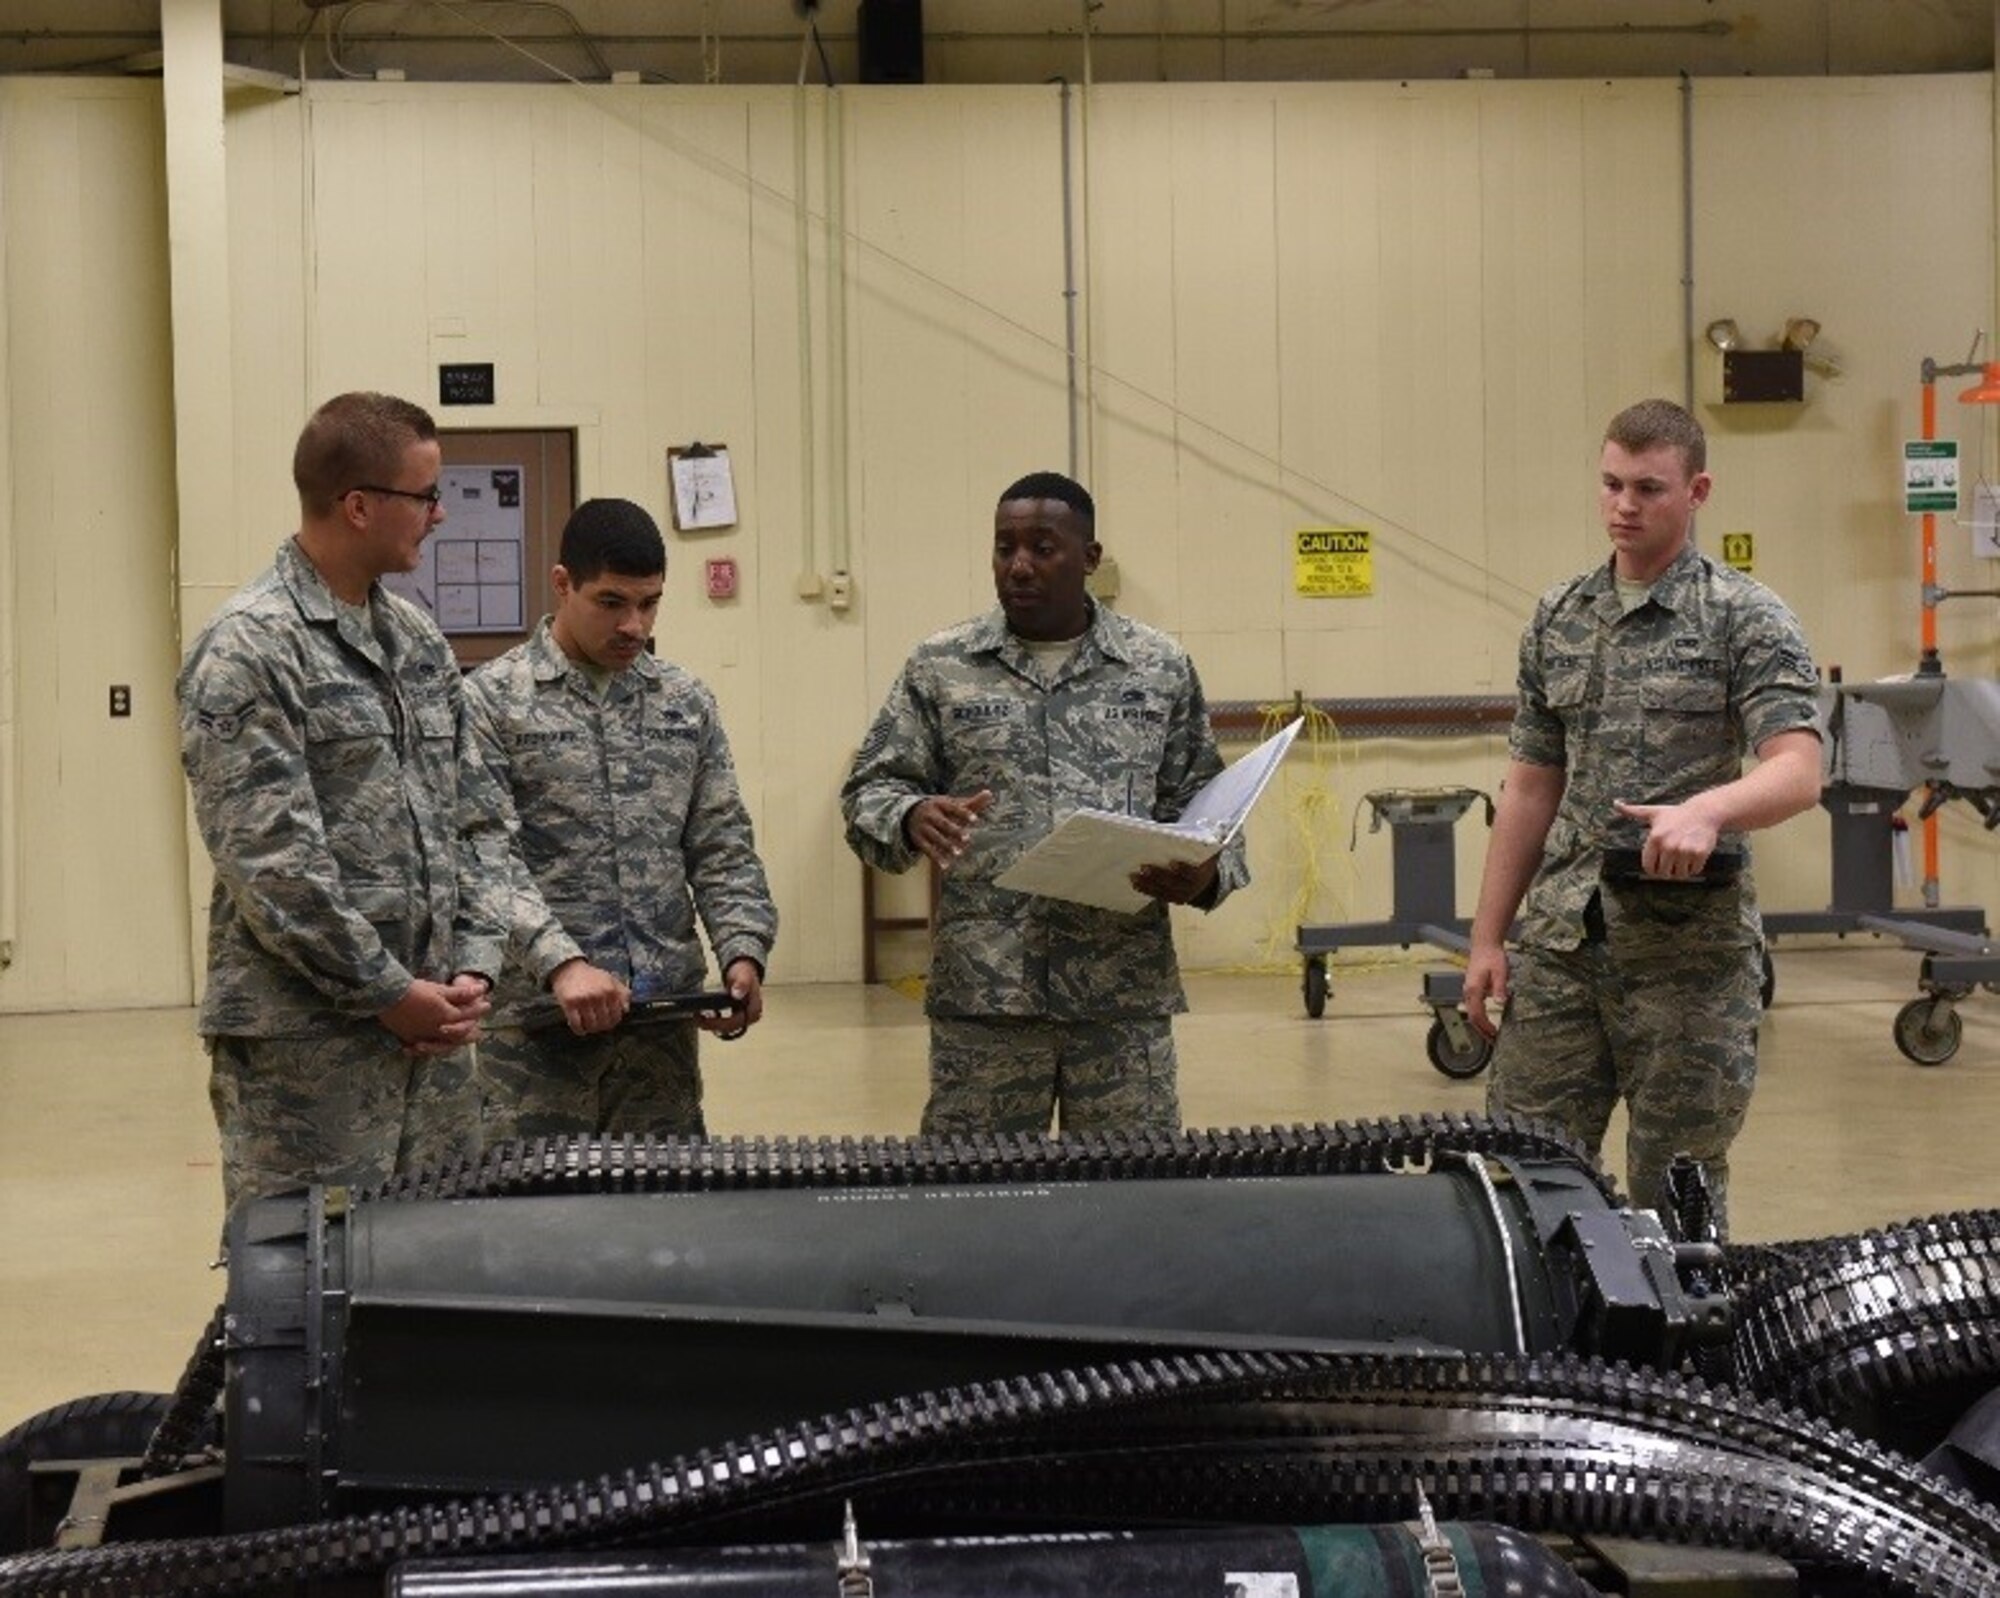 U.S Air Force Tech. Sgt. Tavaras Schoultz, 372nd Training Squadron Detachment 4 instructor, evaluates his students on proper weapons systems maintenance at Tyndall Air Force Base, Fla., March 16, 2017. Schoultz was presented with the 2016 Instructor of the Year award at the Maintenance Professional of the Year awards ceremony in February. (U.S. Air Force photo by Airman 1st Class Cody R. Miller/Released) 